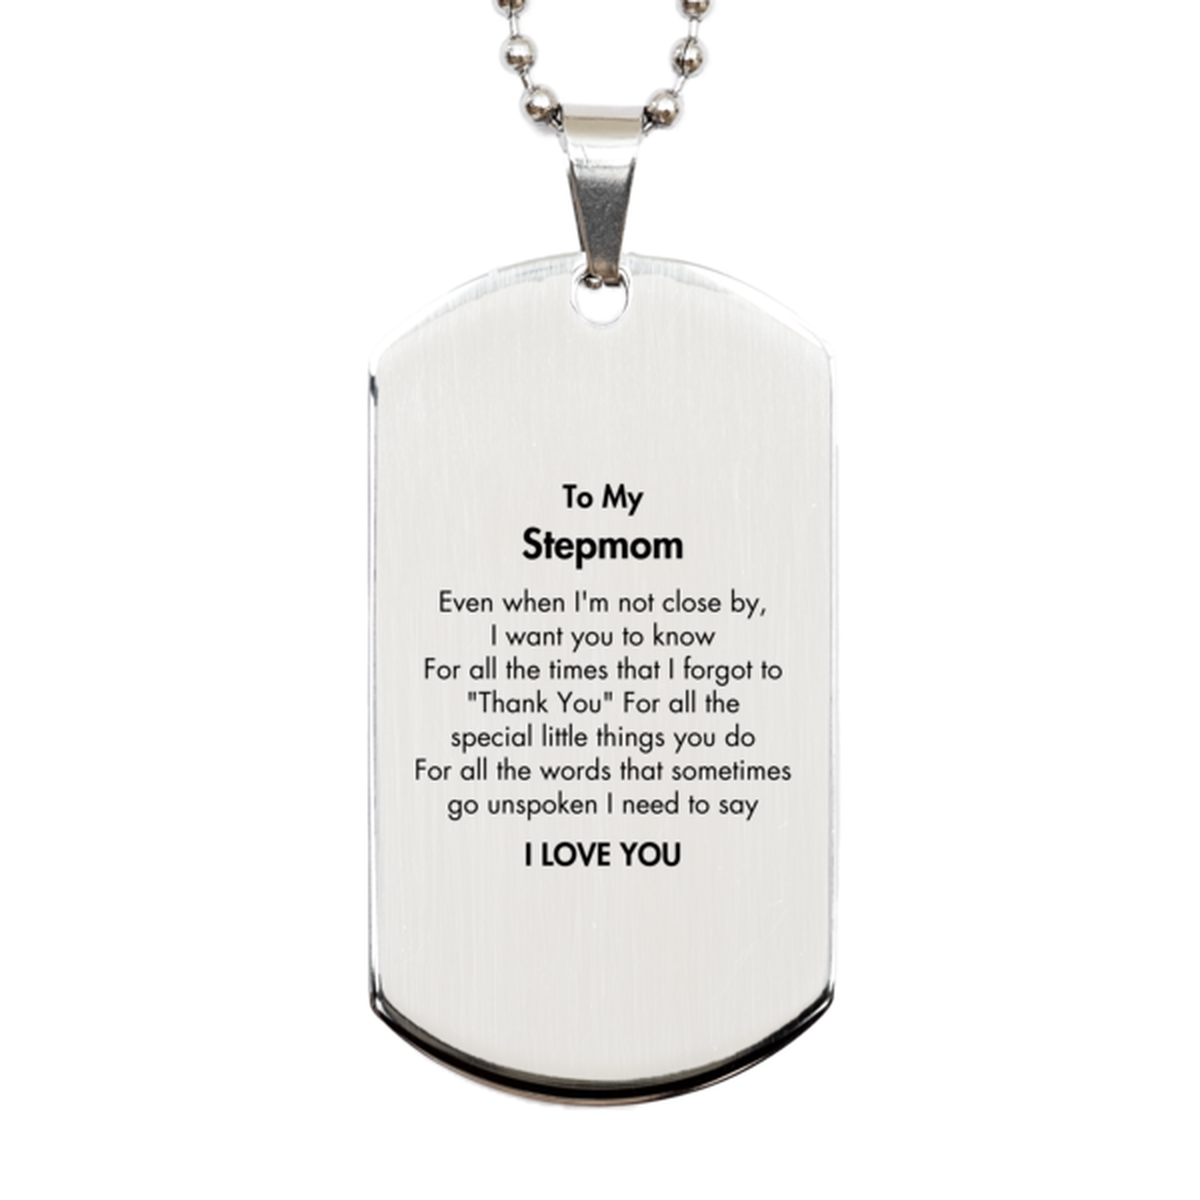 Thank You Gifts for Stepmom, Keepsake Silver Dog Tag Gifts for Stepmom Birthday Mother's day Father's Day Stepmom For all the words That sometimes go unspoken I need to say I LOVE YOU